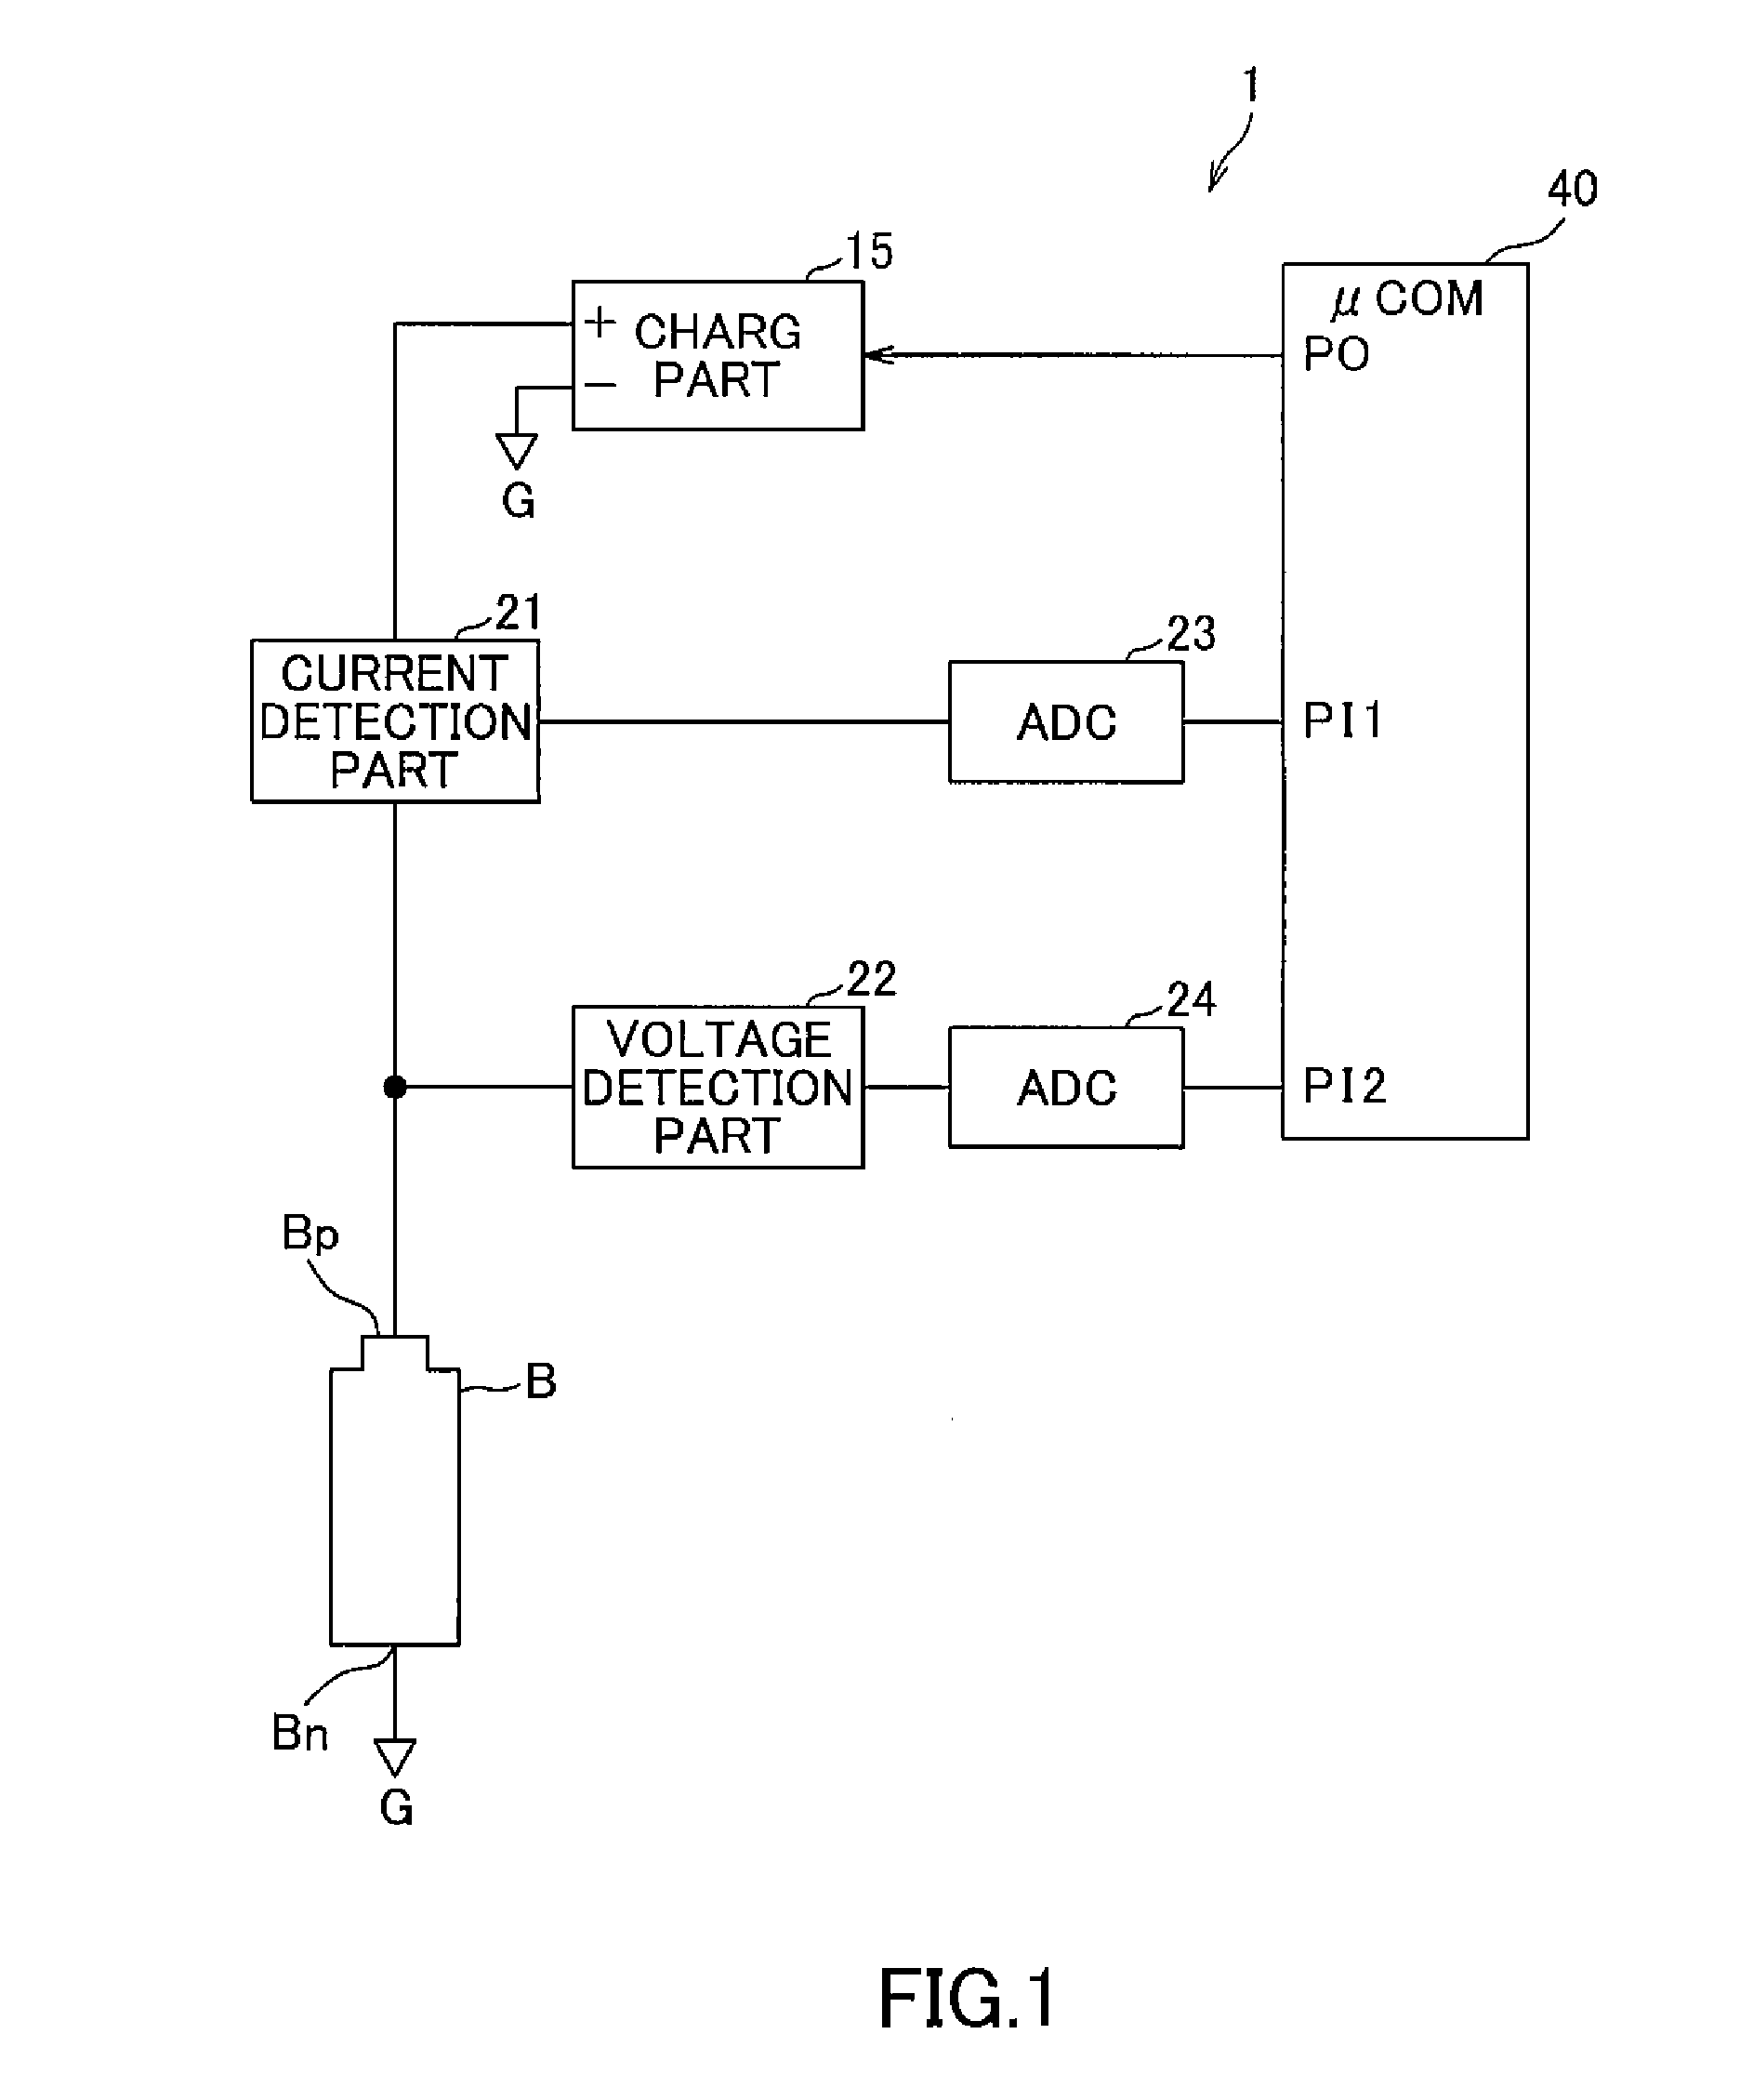 Battery state detection device